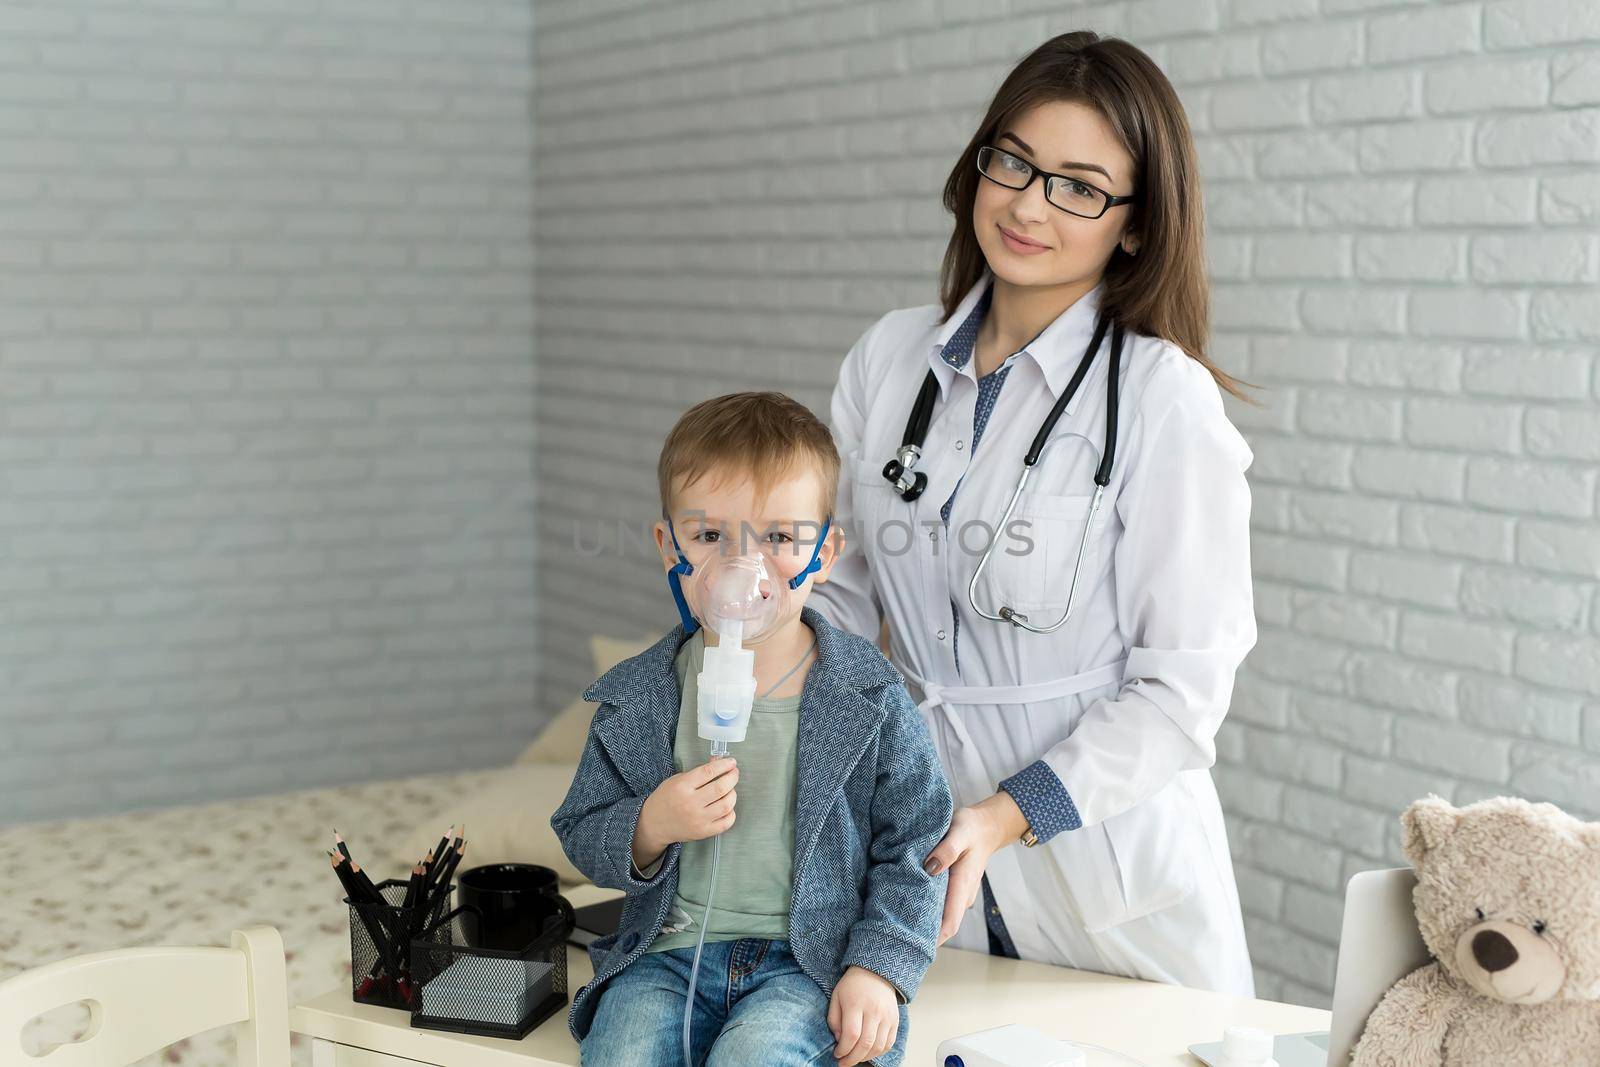 Medical doctor applying medicine inhalation treatment on a little boy with asthma inhalation therapy by the mask of inhaler by StudioPeace